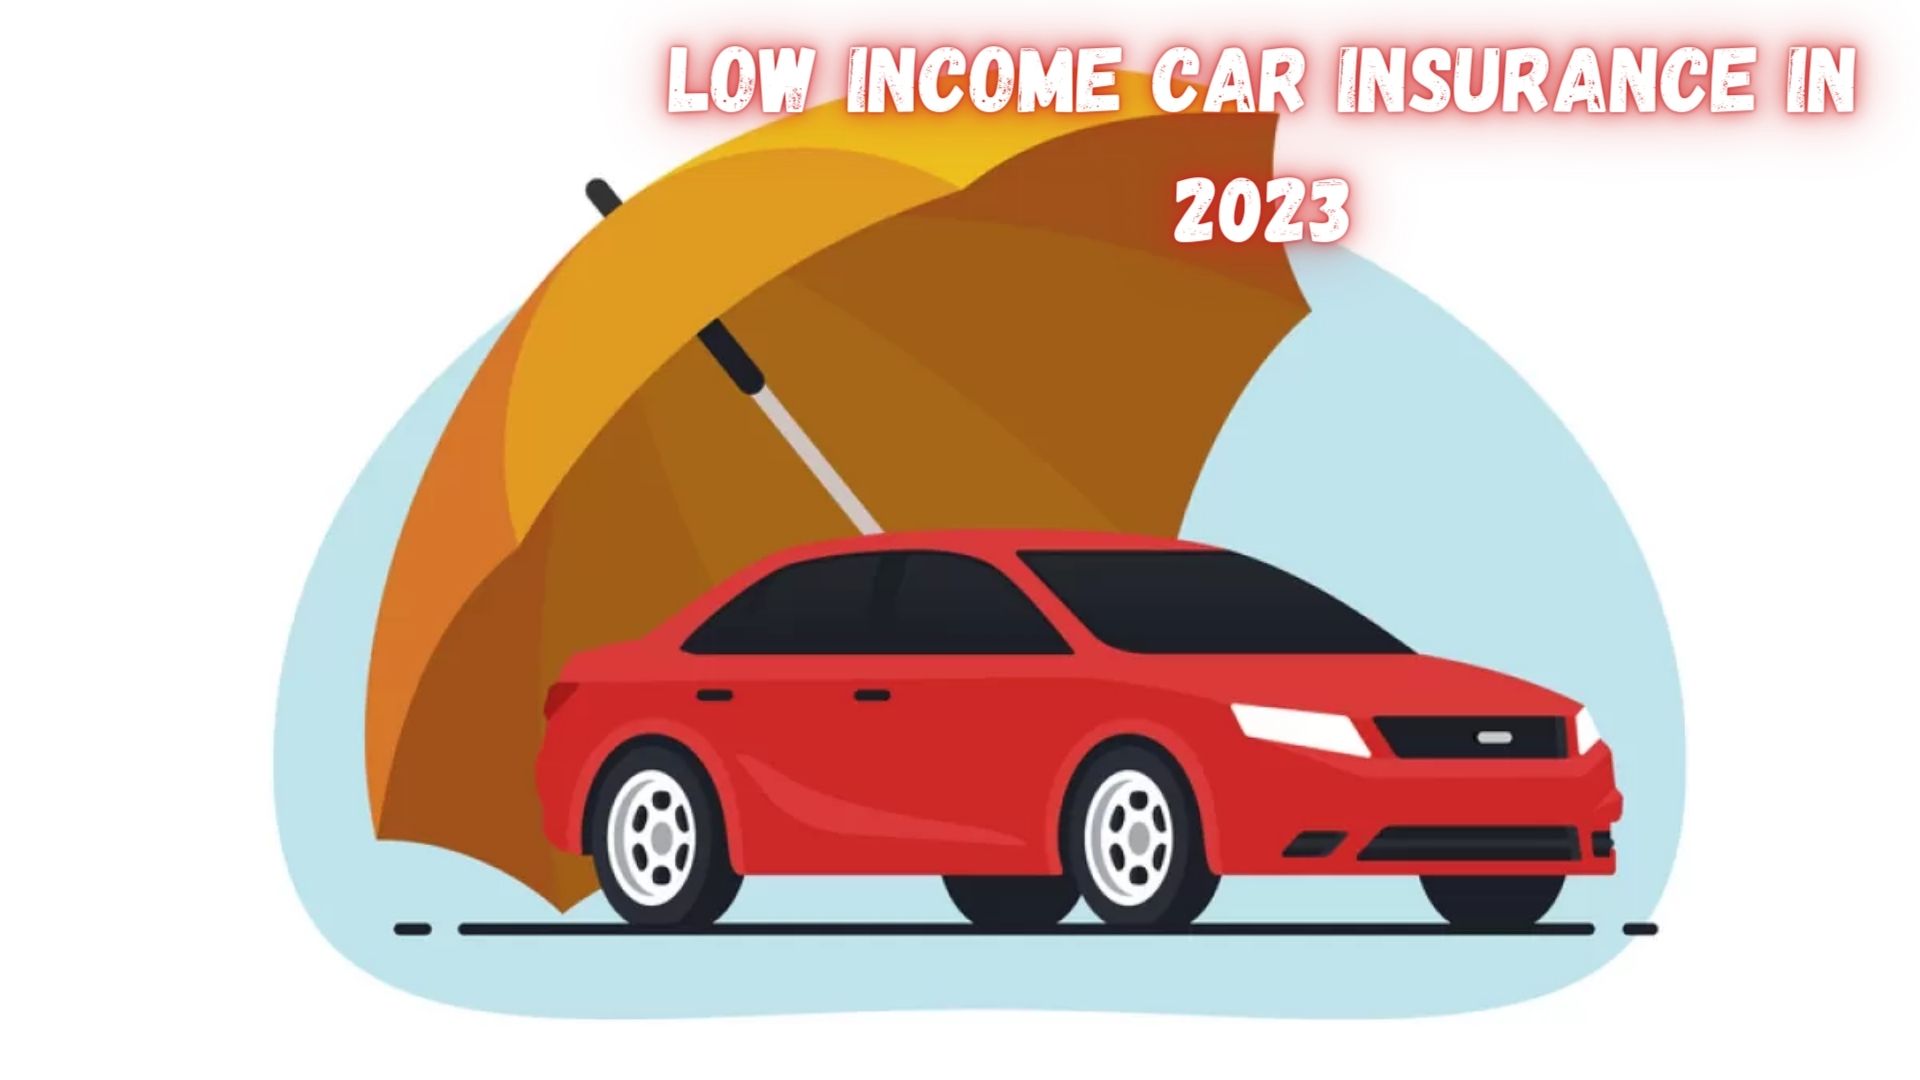 Low Income Car Insurance in 2023.